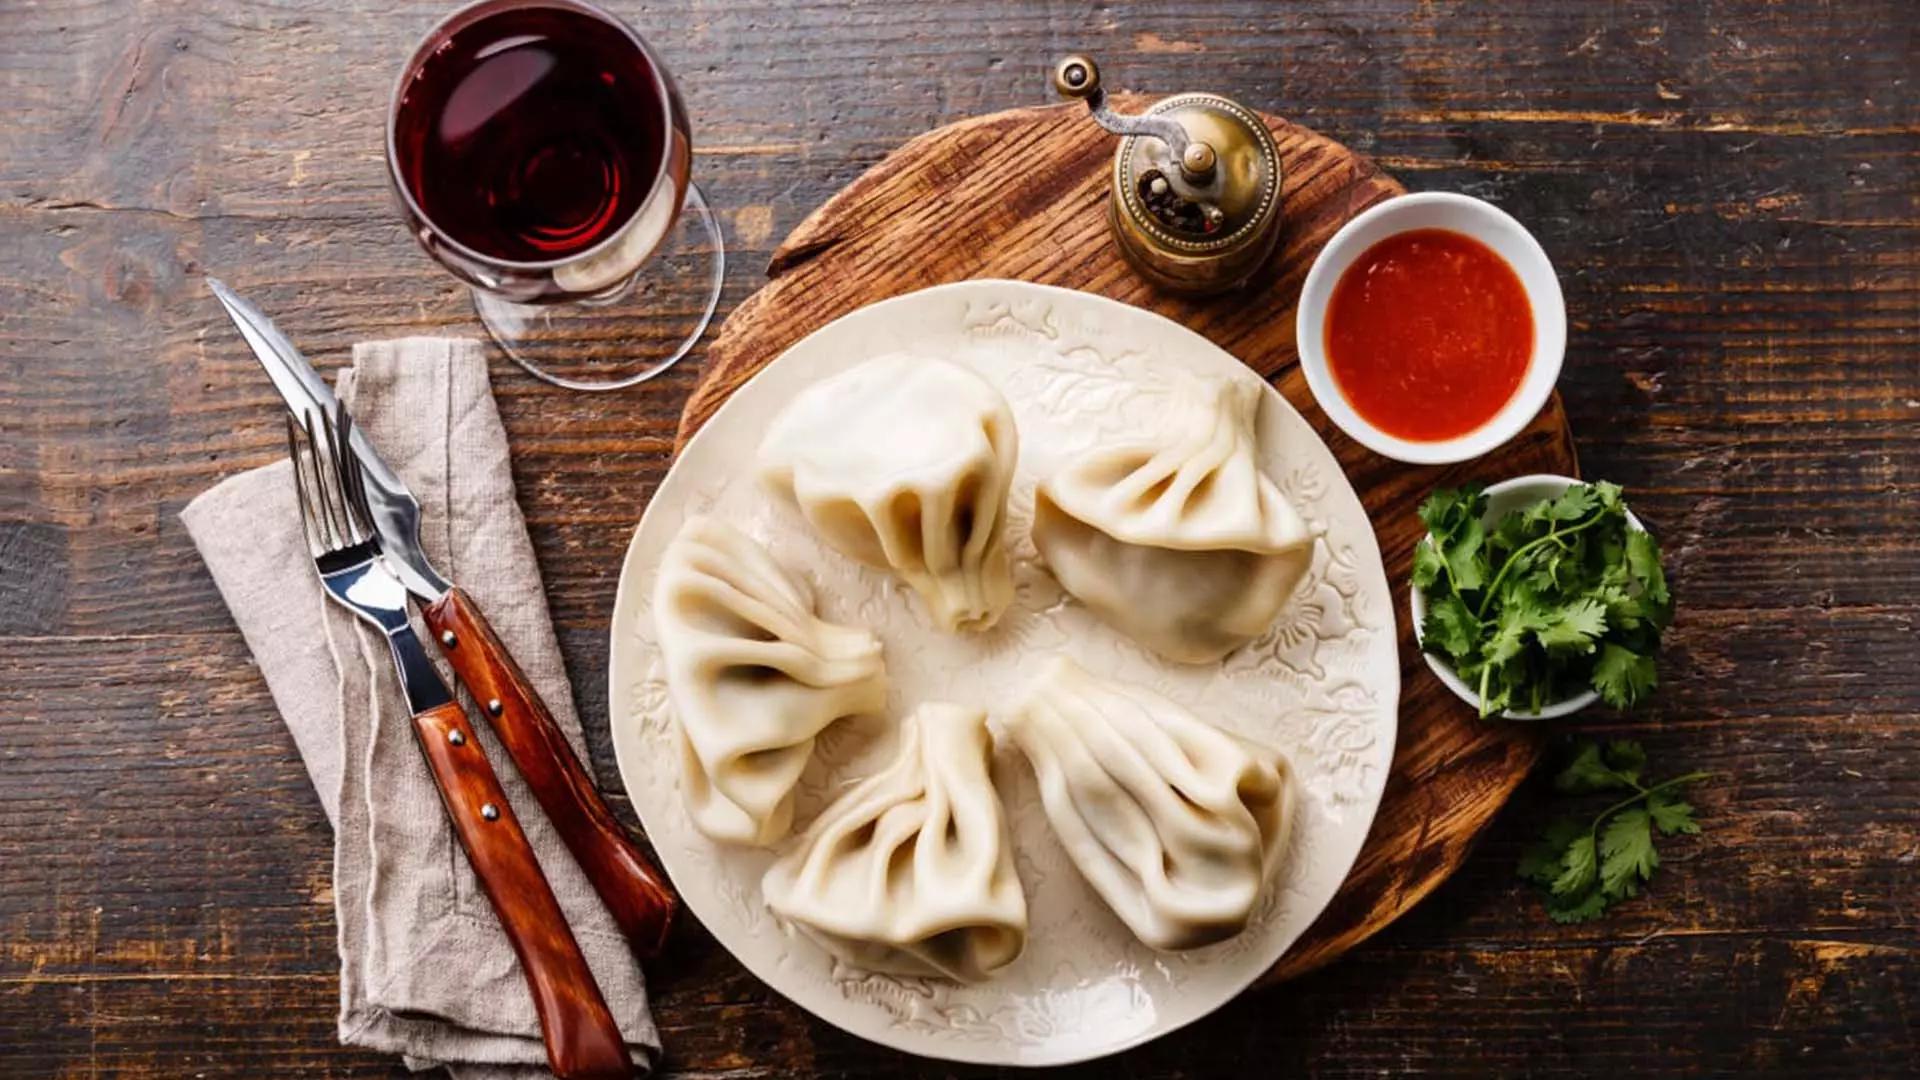 Georgian dumplings Khinkali with meat, tomato spicy sauce and wine